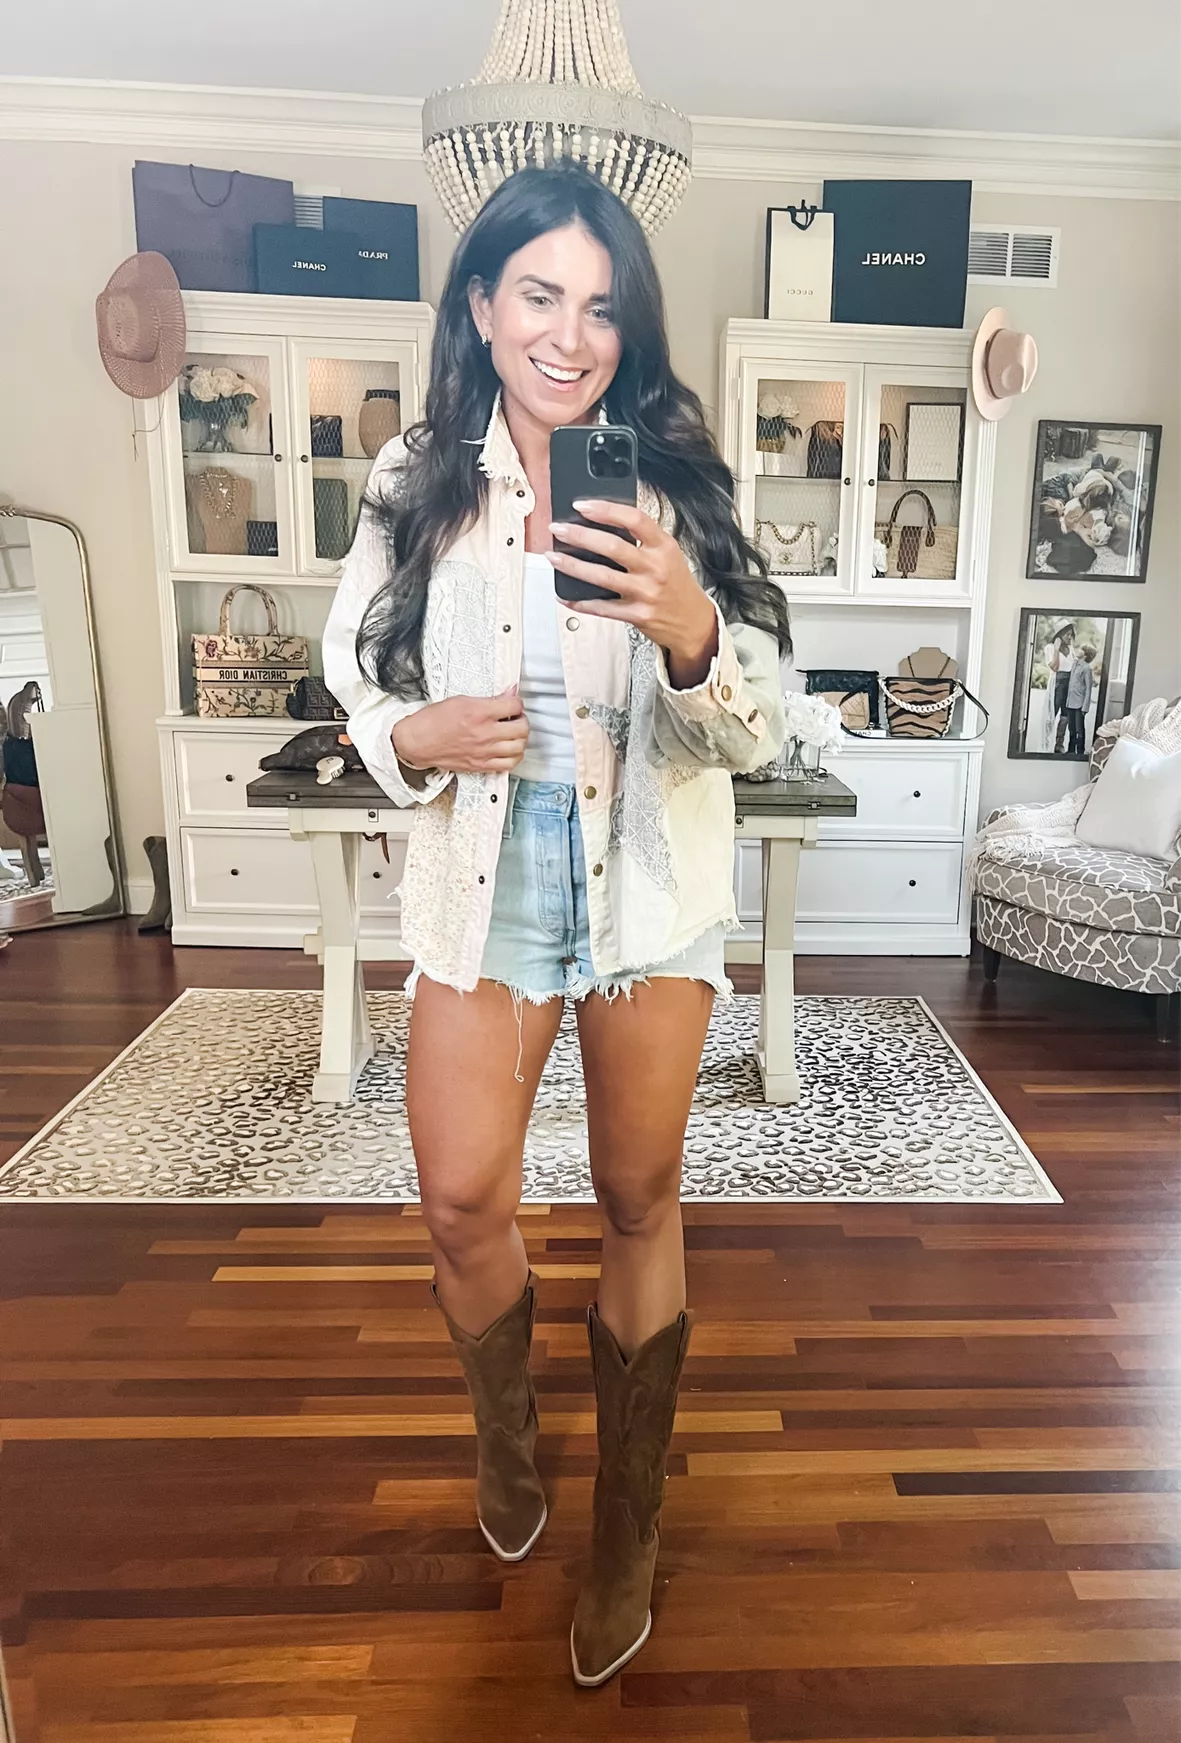 winter country concert outfit